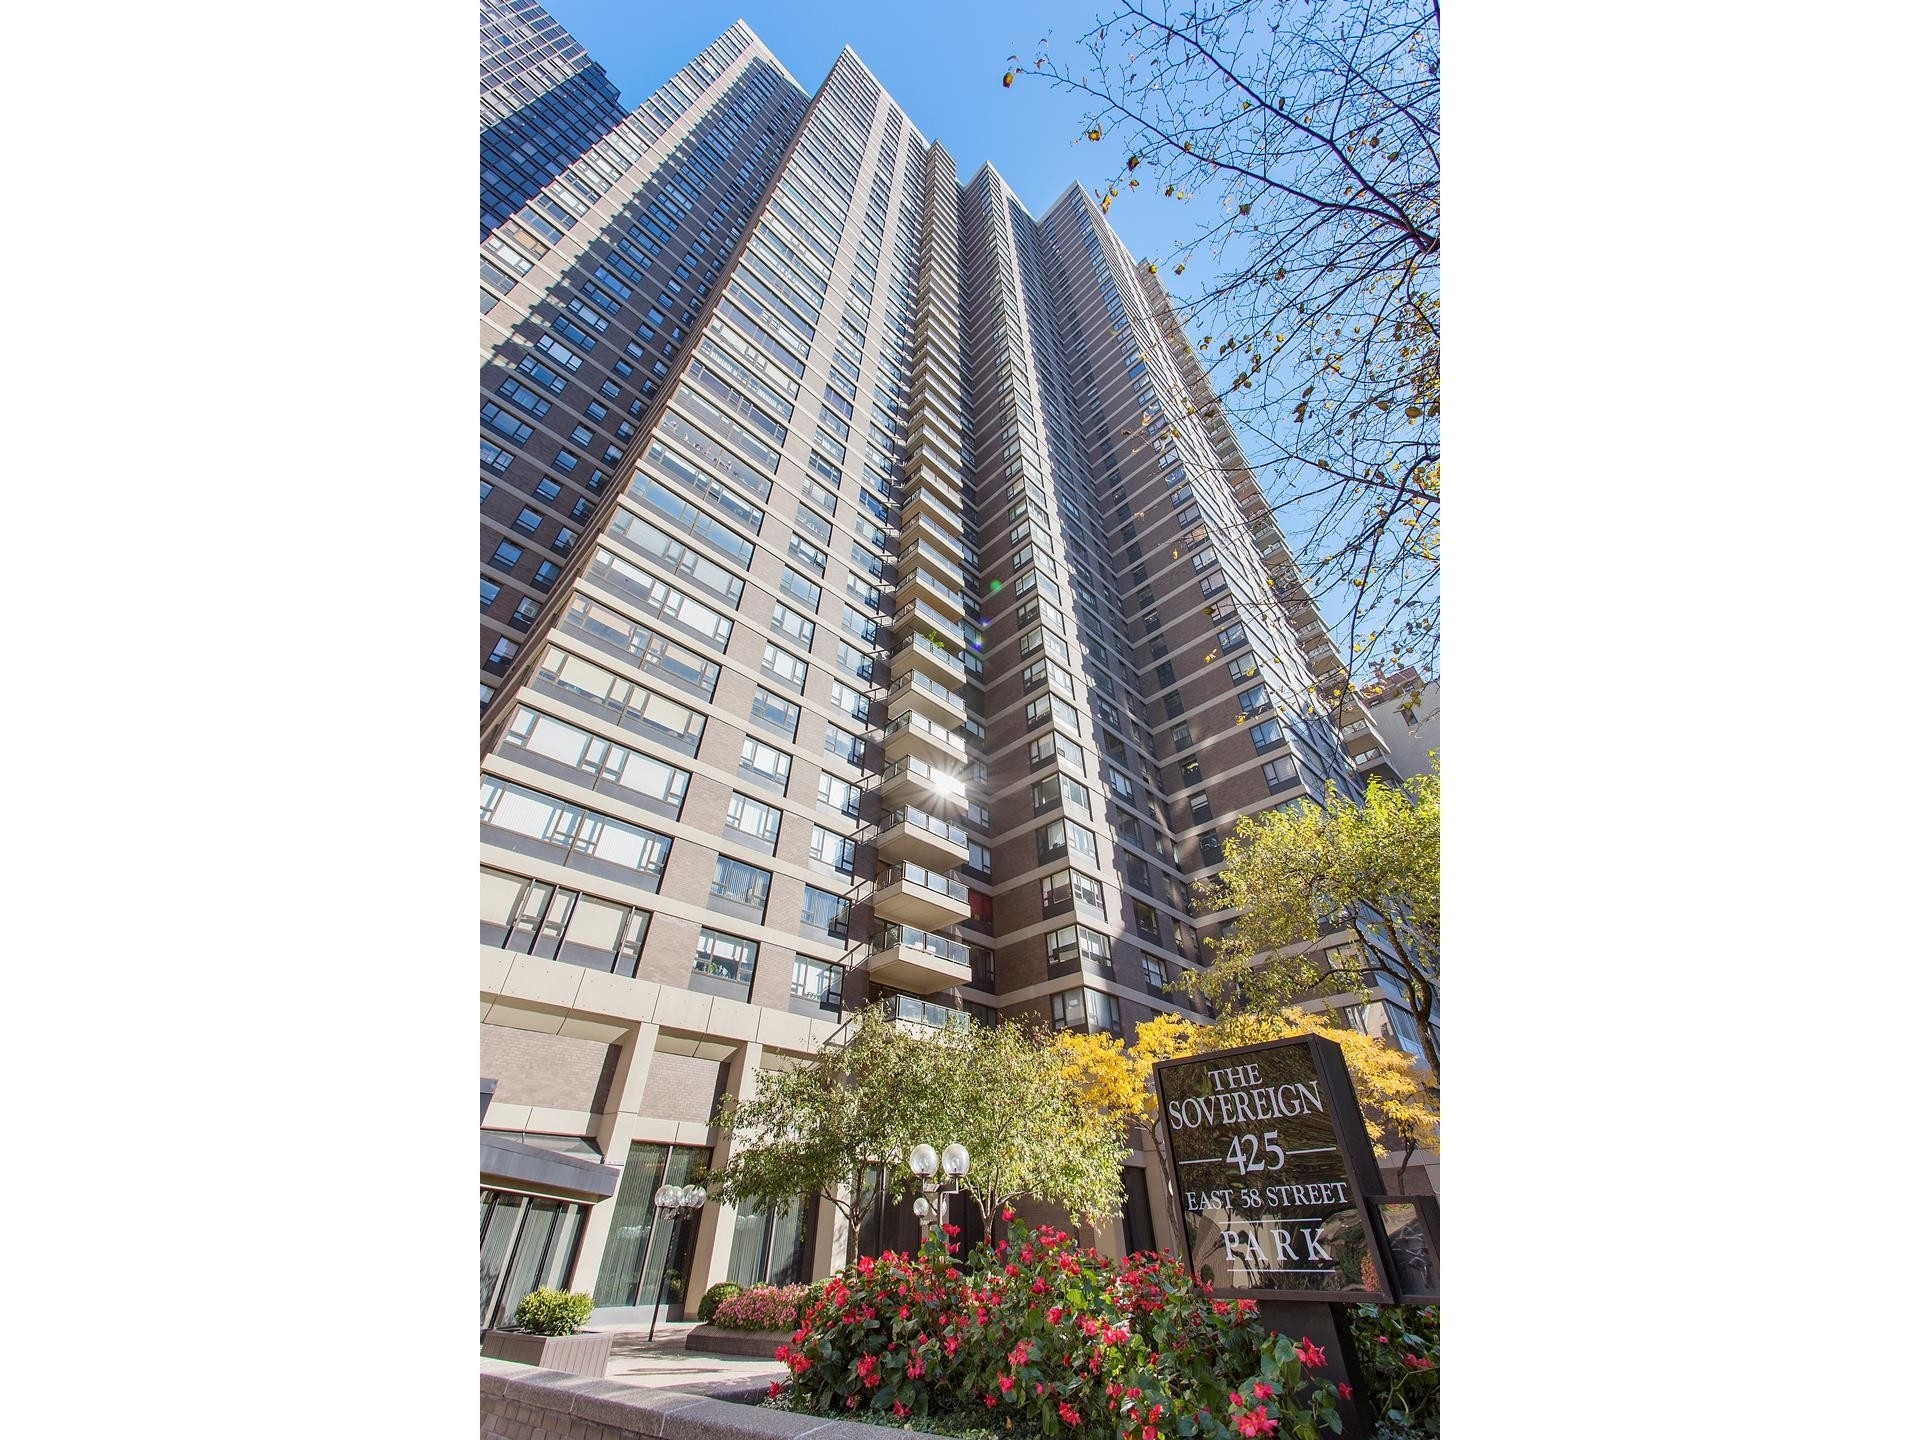 21. Co-op Properties for Sale at The Sovereign, 425 E 58TH ST, 38A Sutton Place, New York, New York 10022